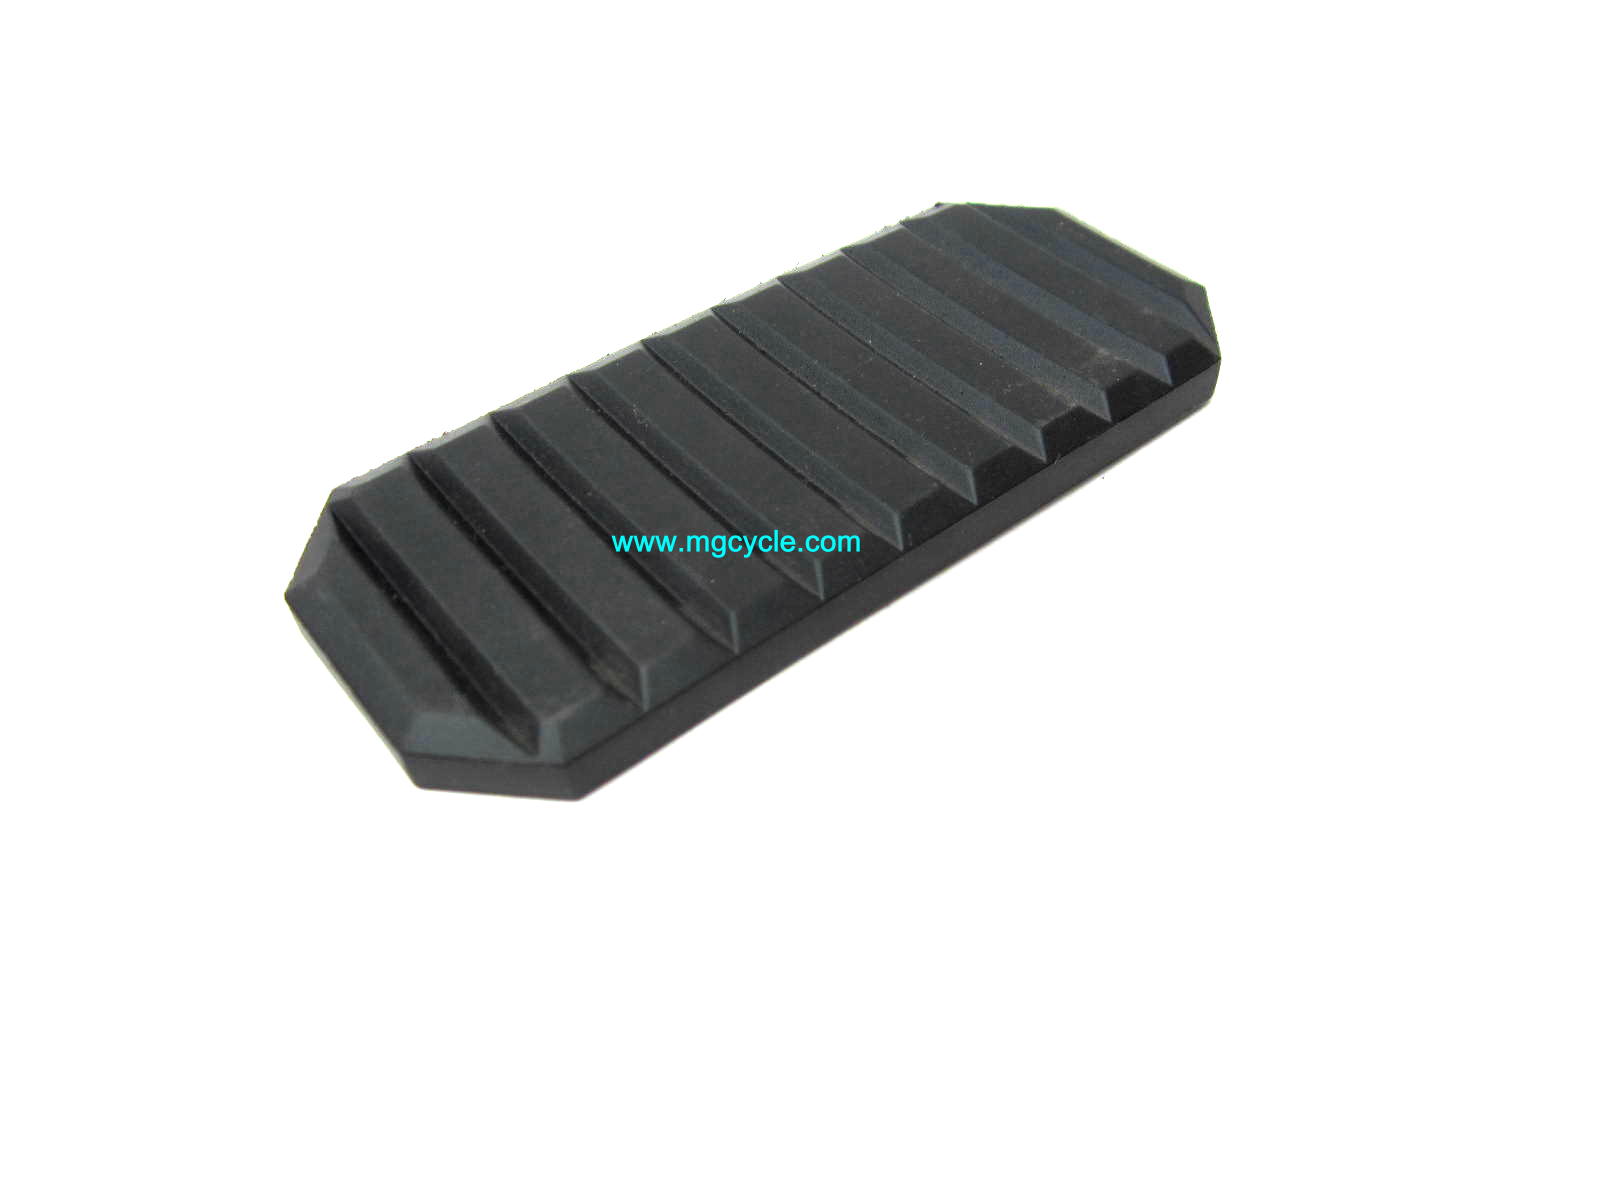 Replacement rubber knee pad GU18941750